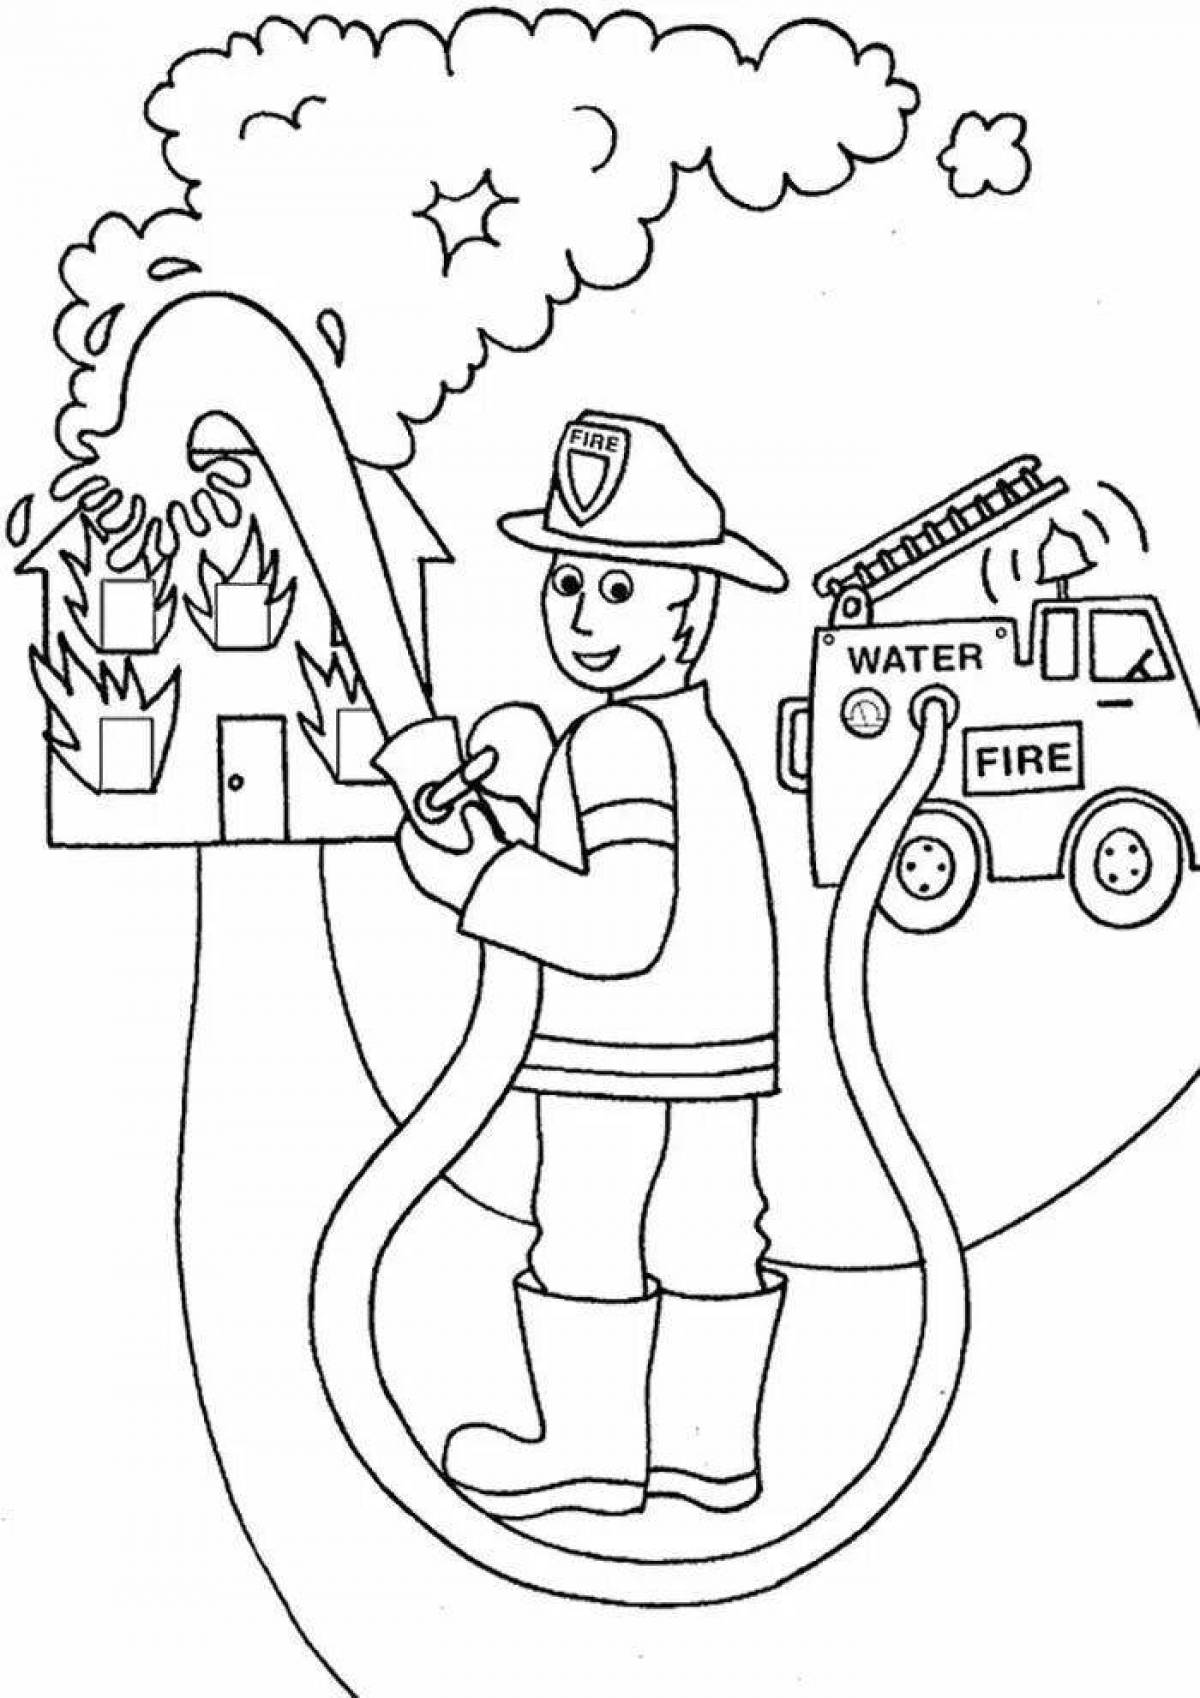 For kids on fire safety #5